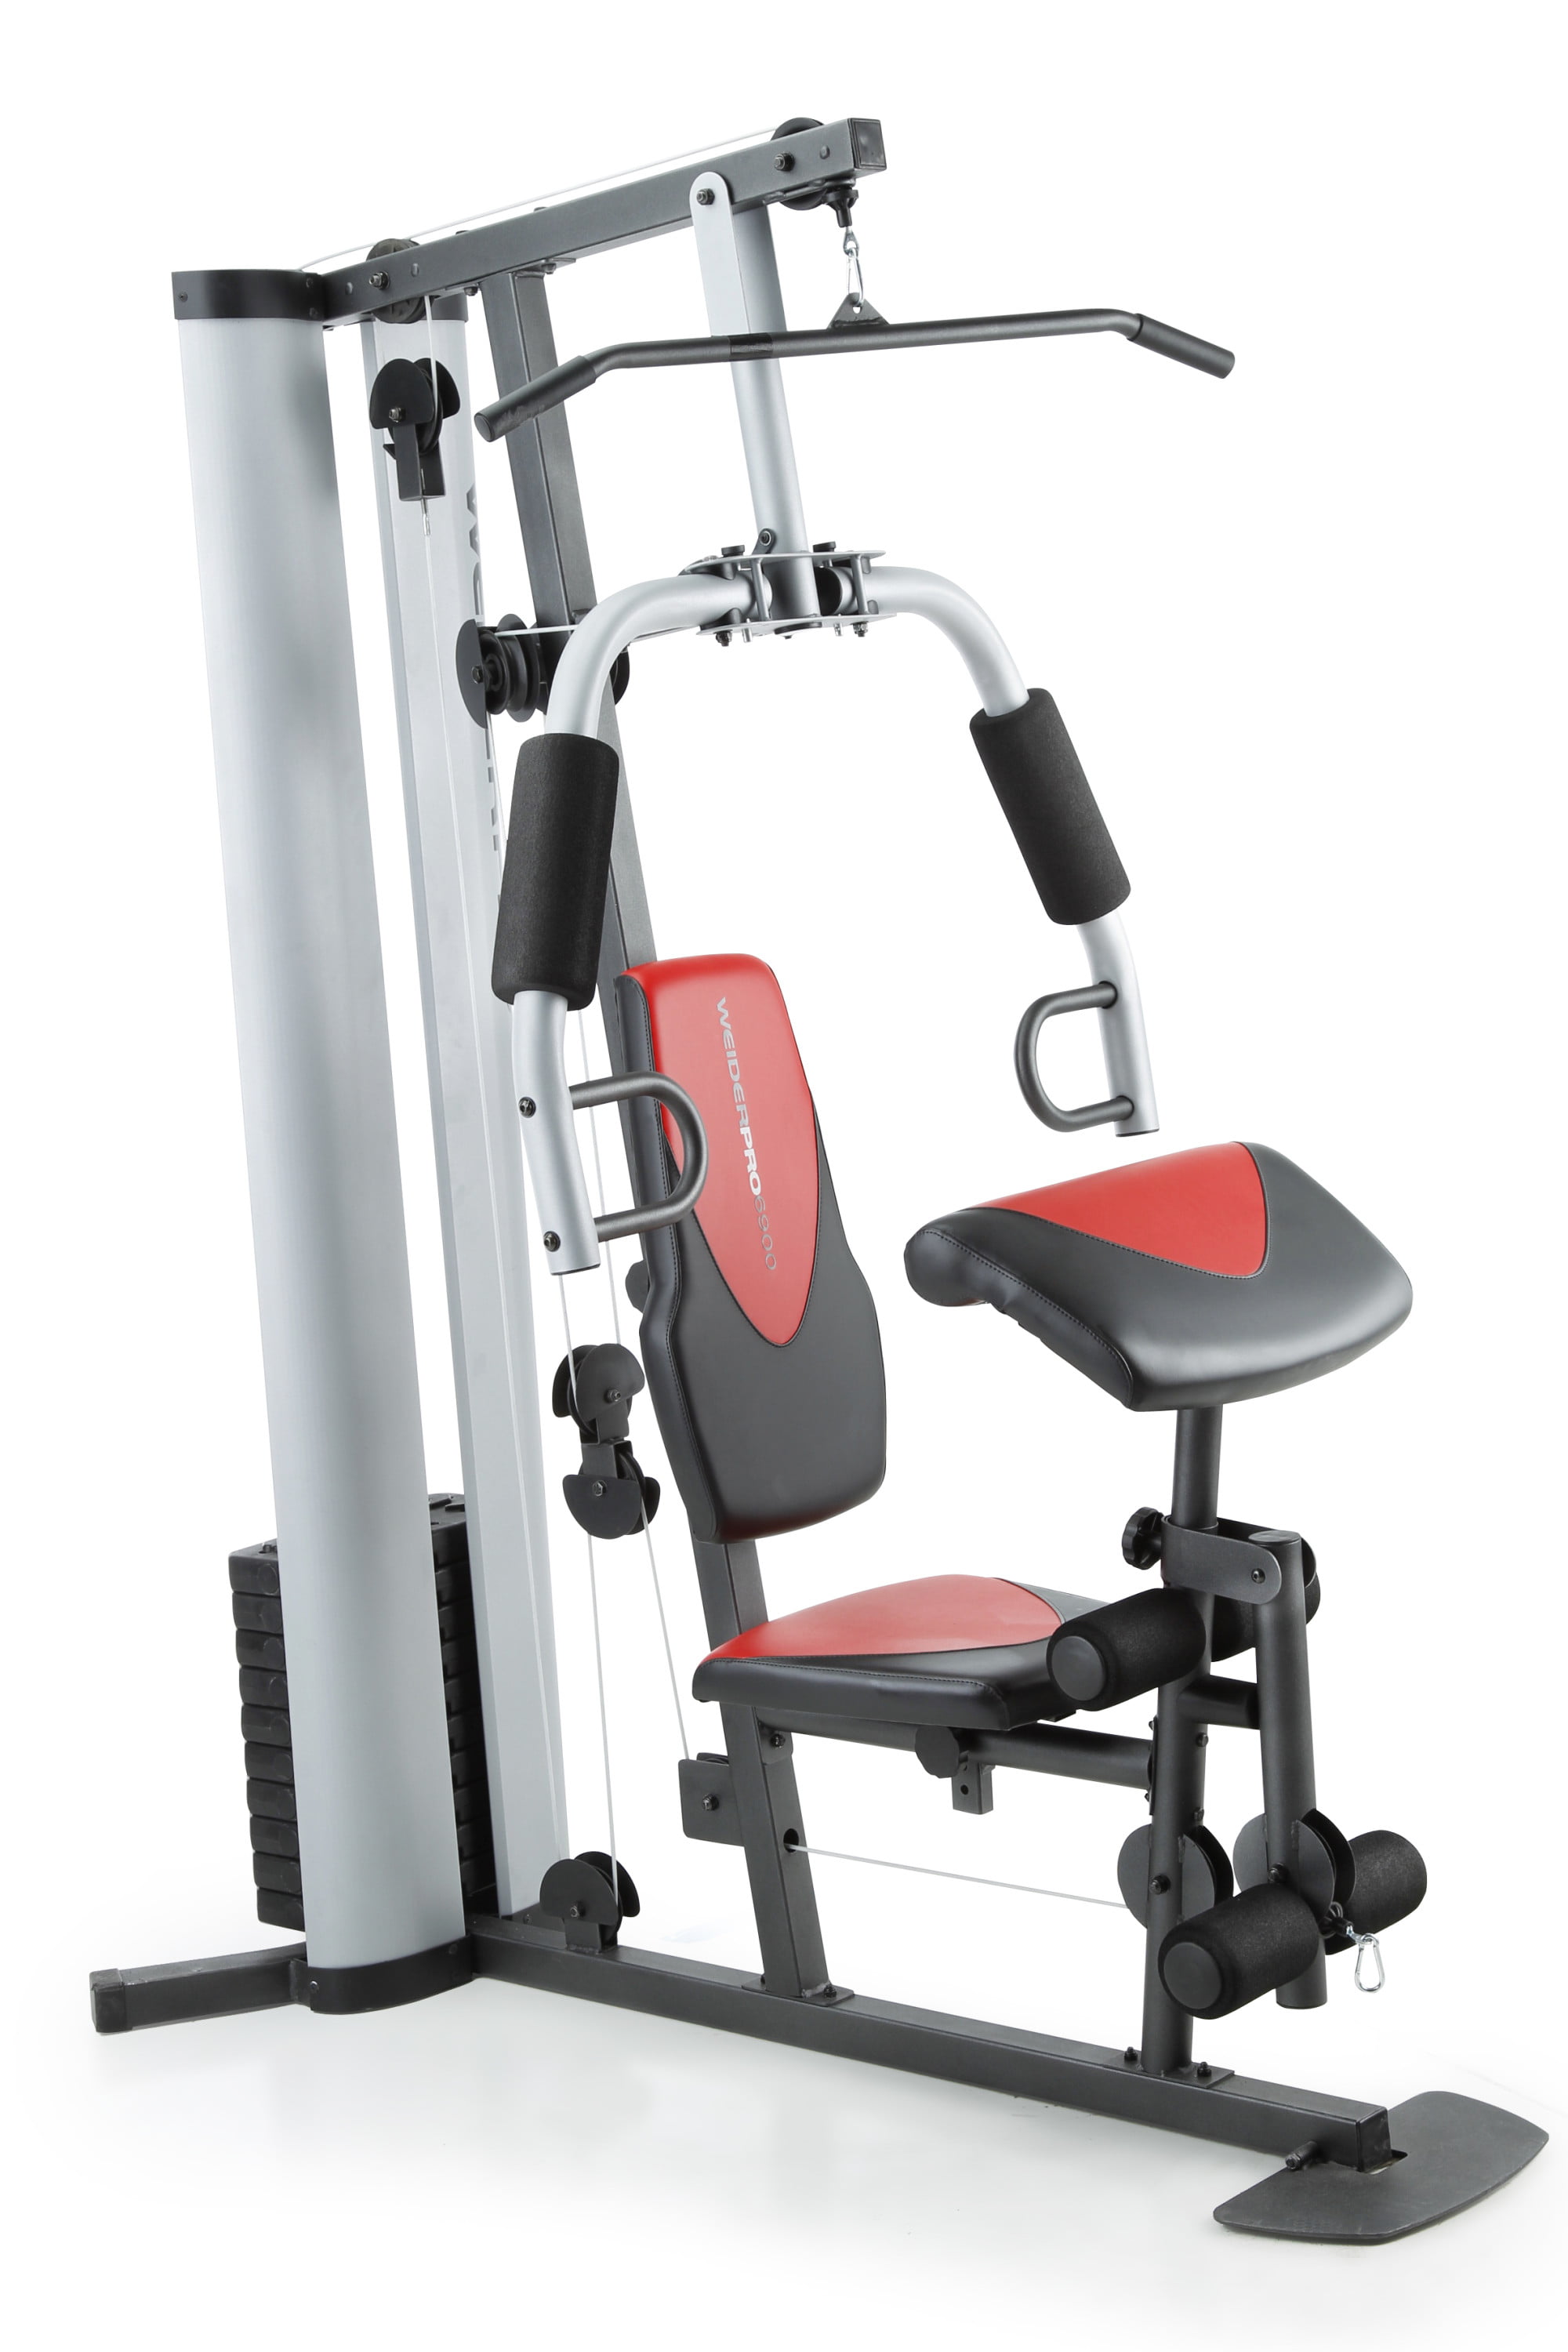 Weider Pro 6900 Home Gym System With Workout Exercise Chart | Shop www.spora.ws